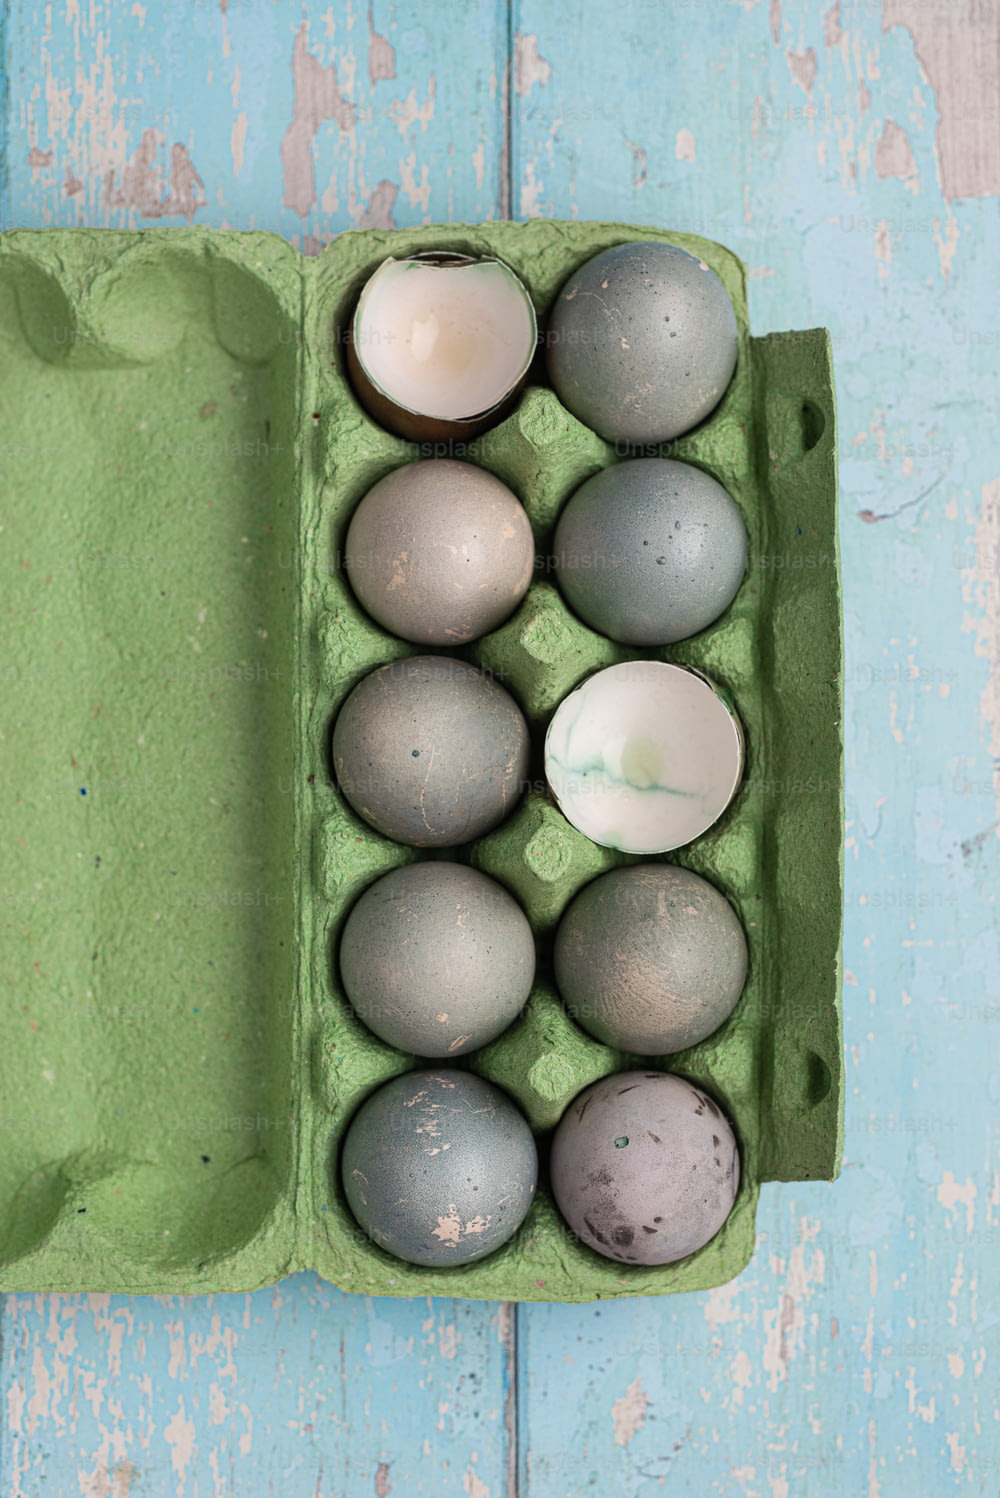 a carton of eggs on a blue wooden table